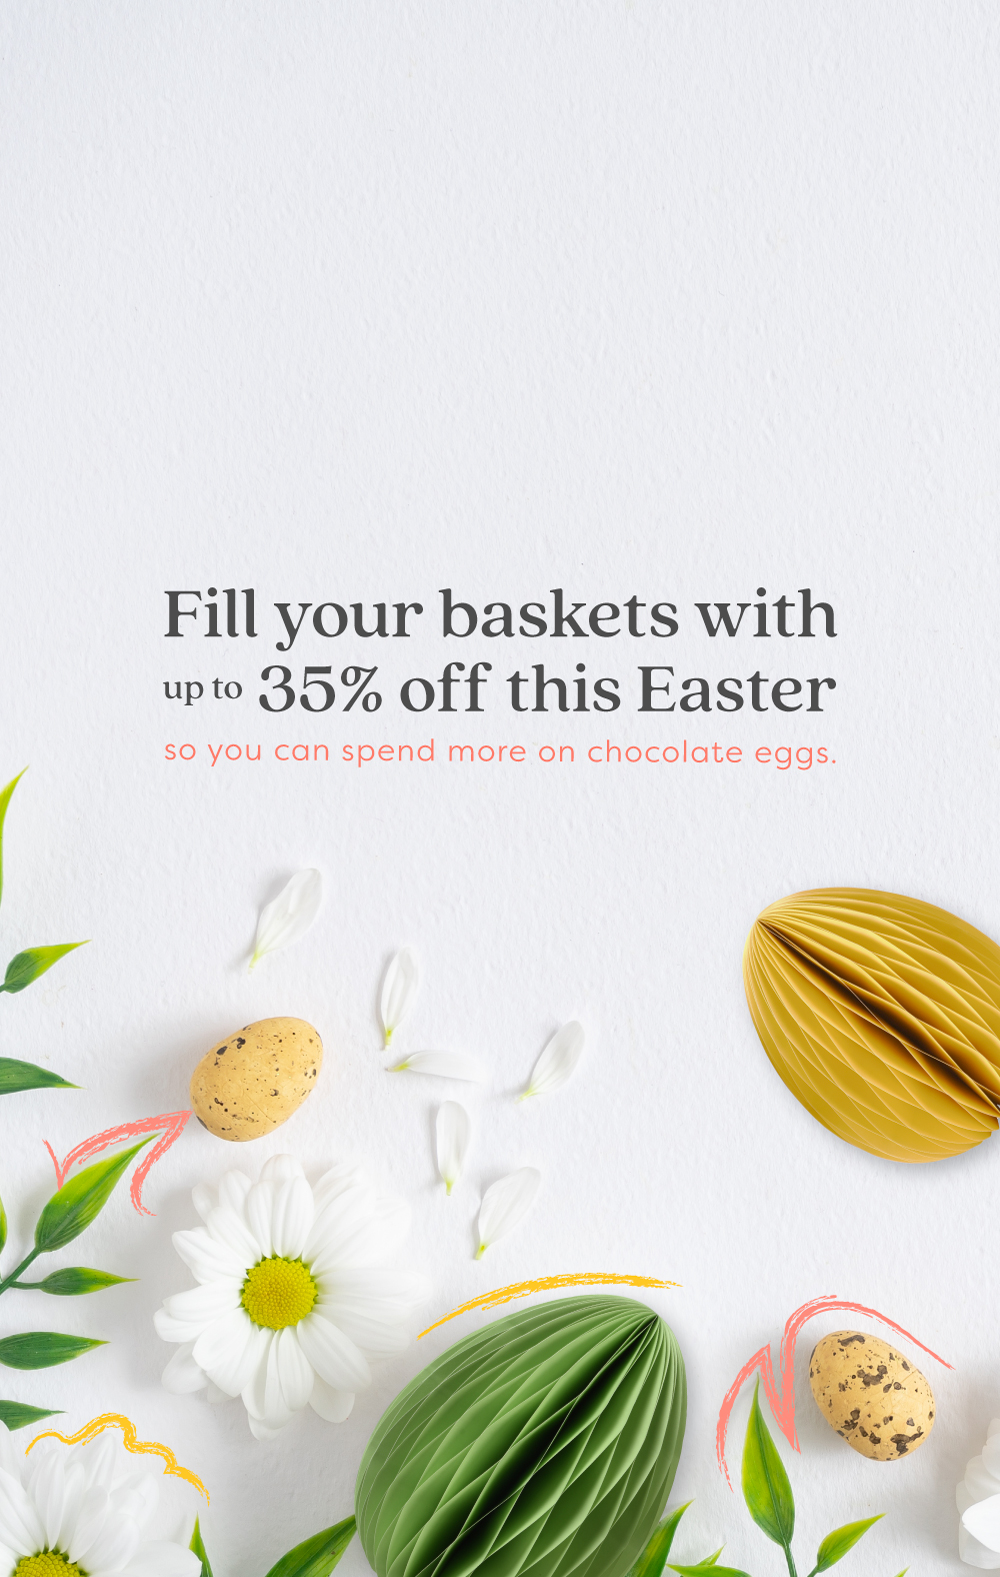 Fill your baskets with up to 35% off this Easter